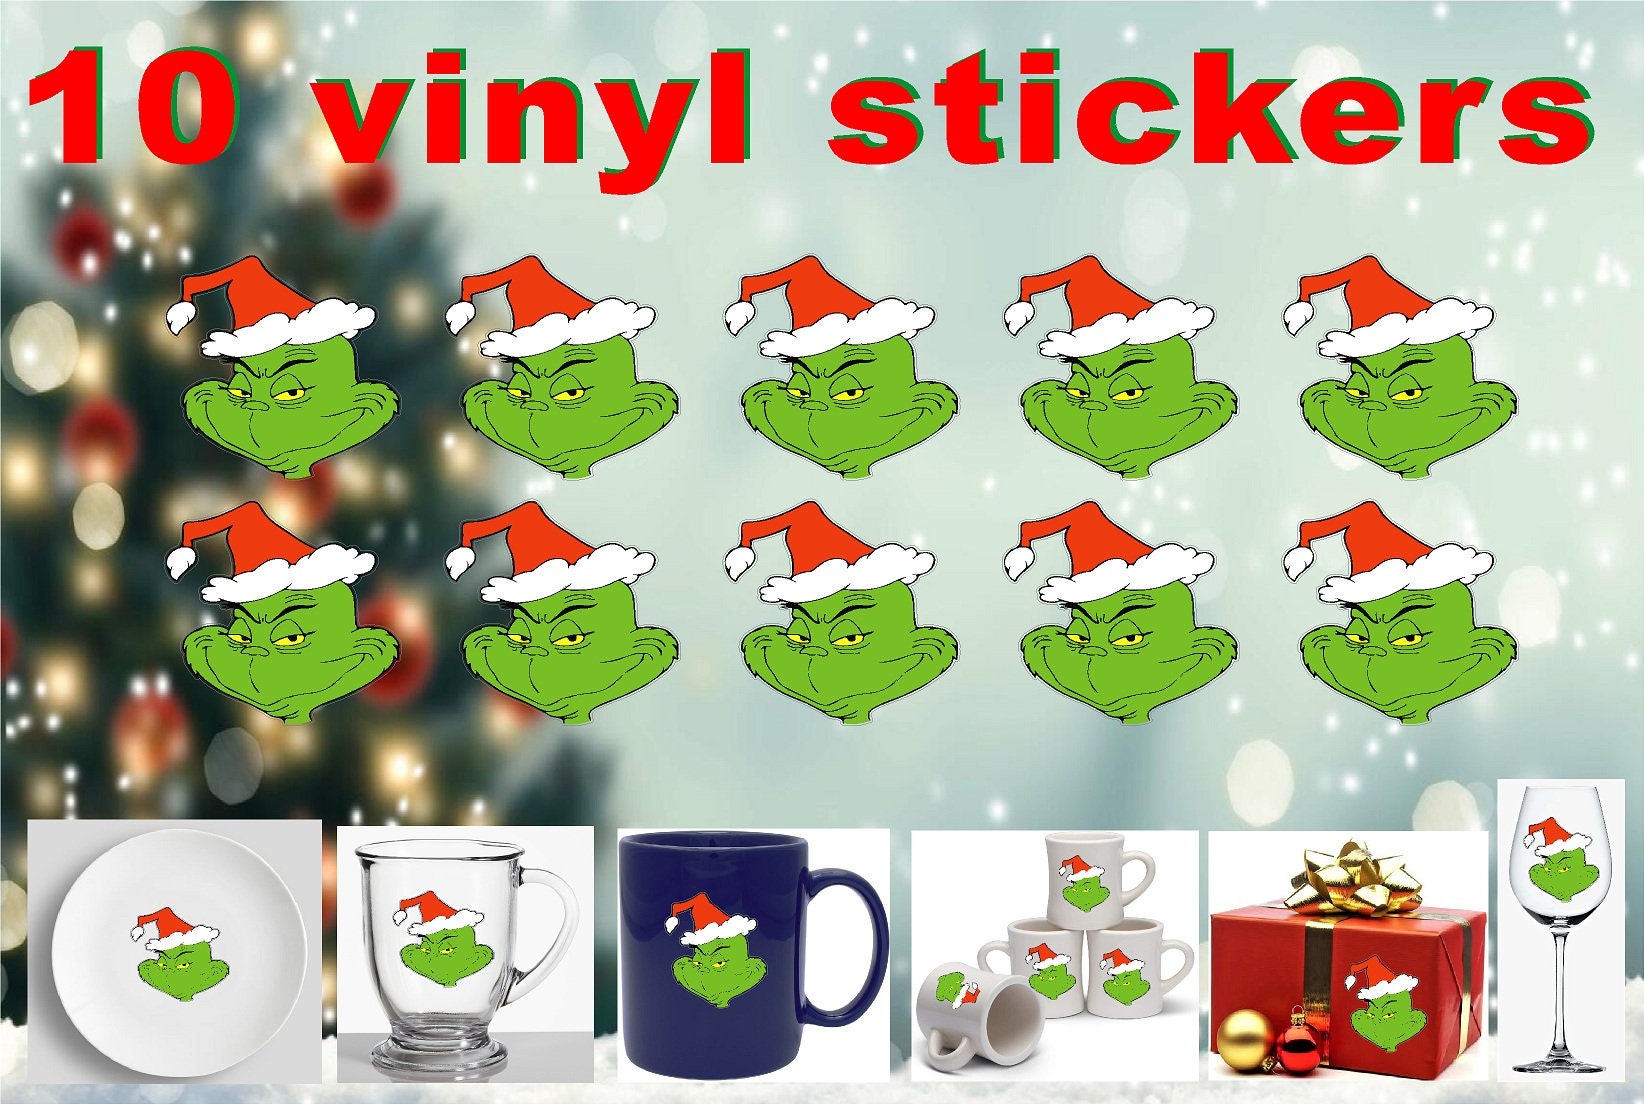 Ready 2 Learn Foam Stickers - Christmas - Pack of 168 - Self-Adhesive Stickers for Kids - 3D Puffy Christmas Stickers for Notebooks, Cards and Crafts